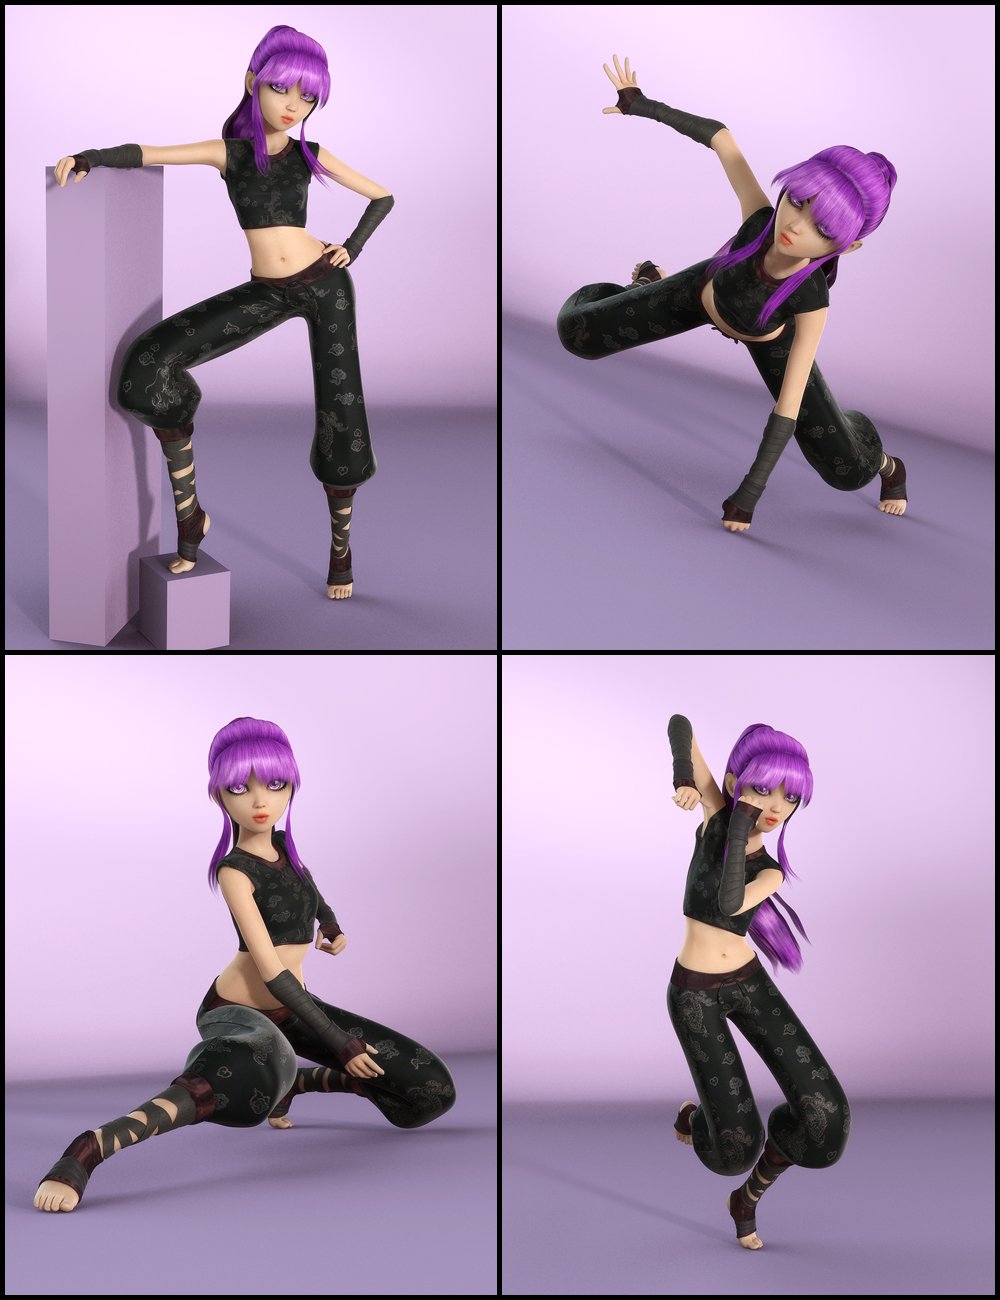 i13 Manga Style by: ironman13, 3D Models by Daz 3D